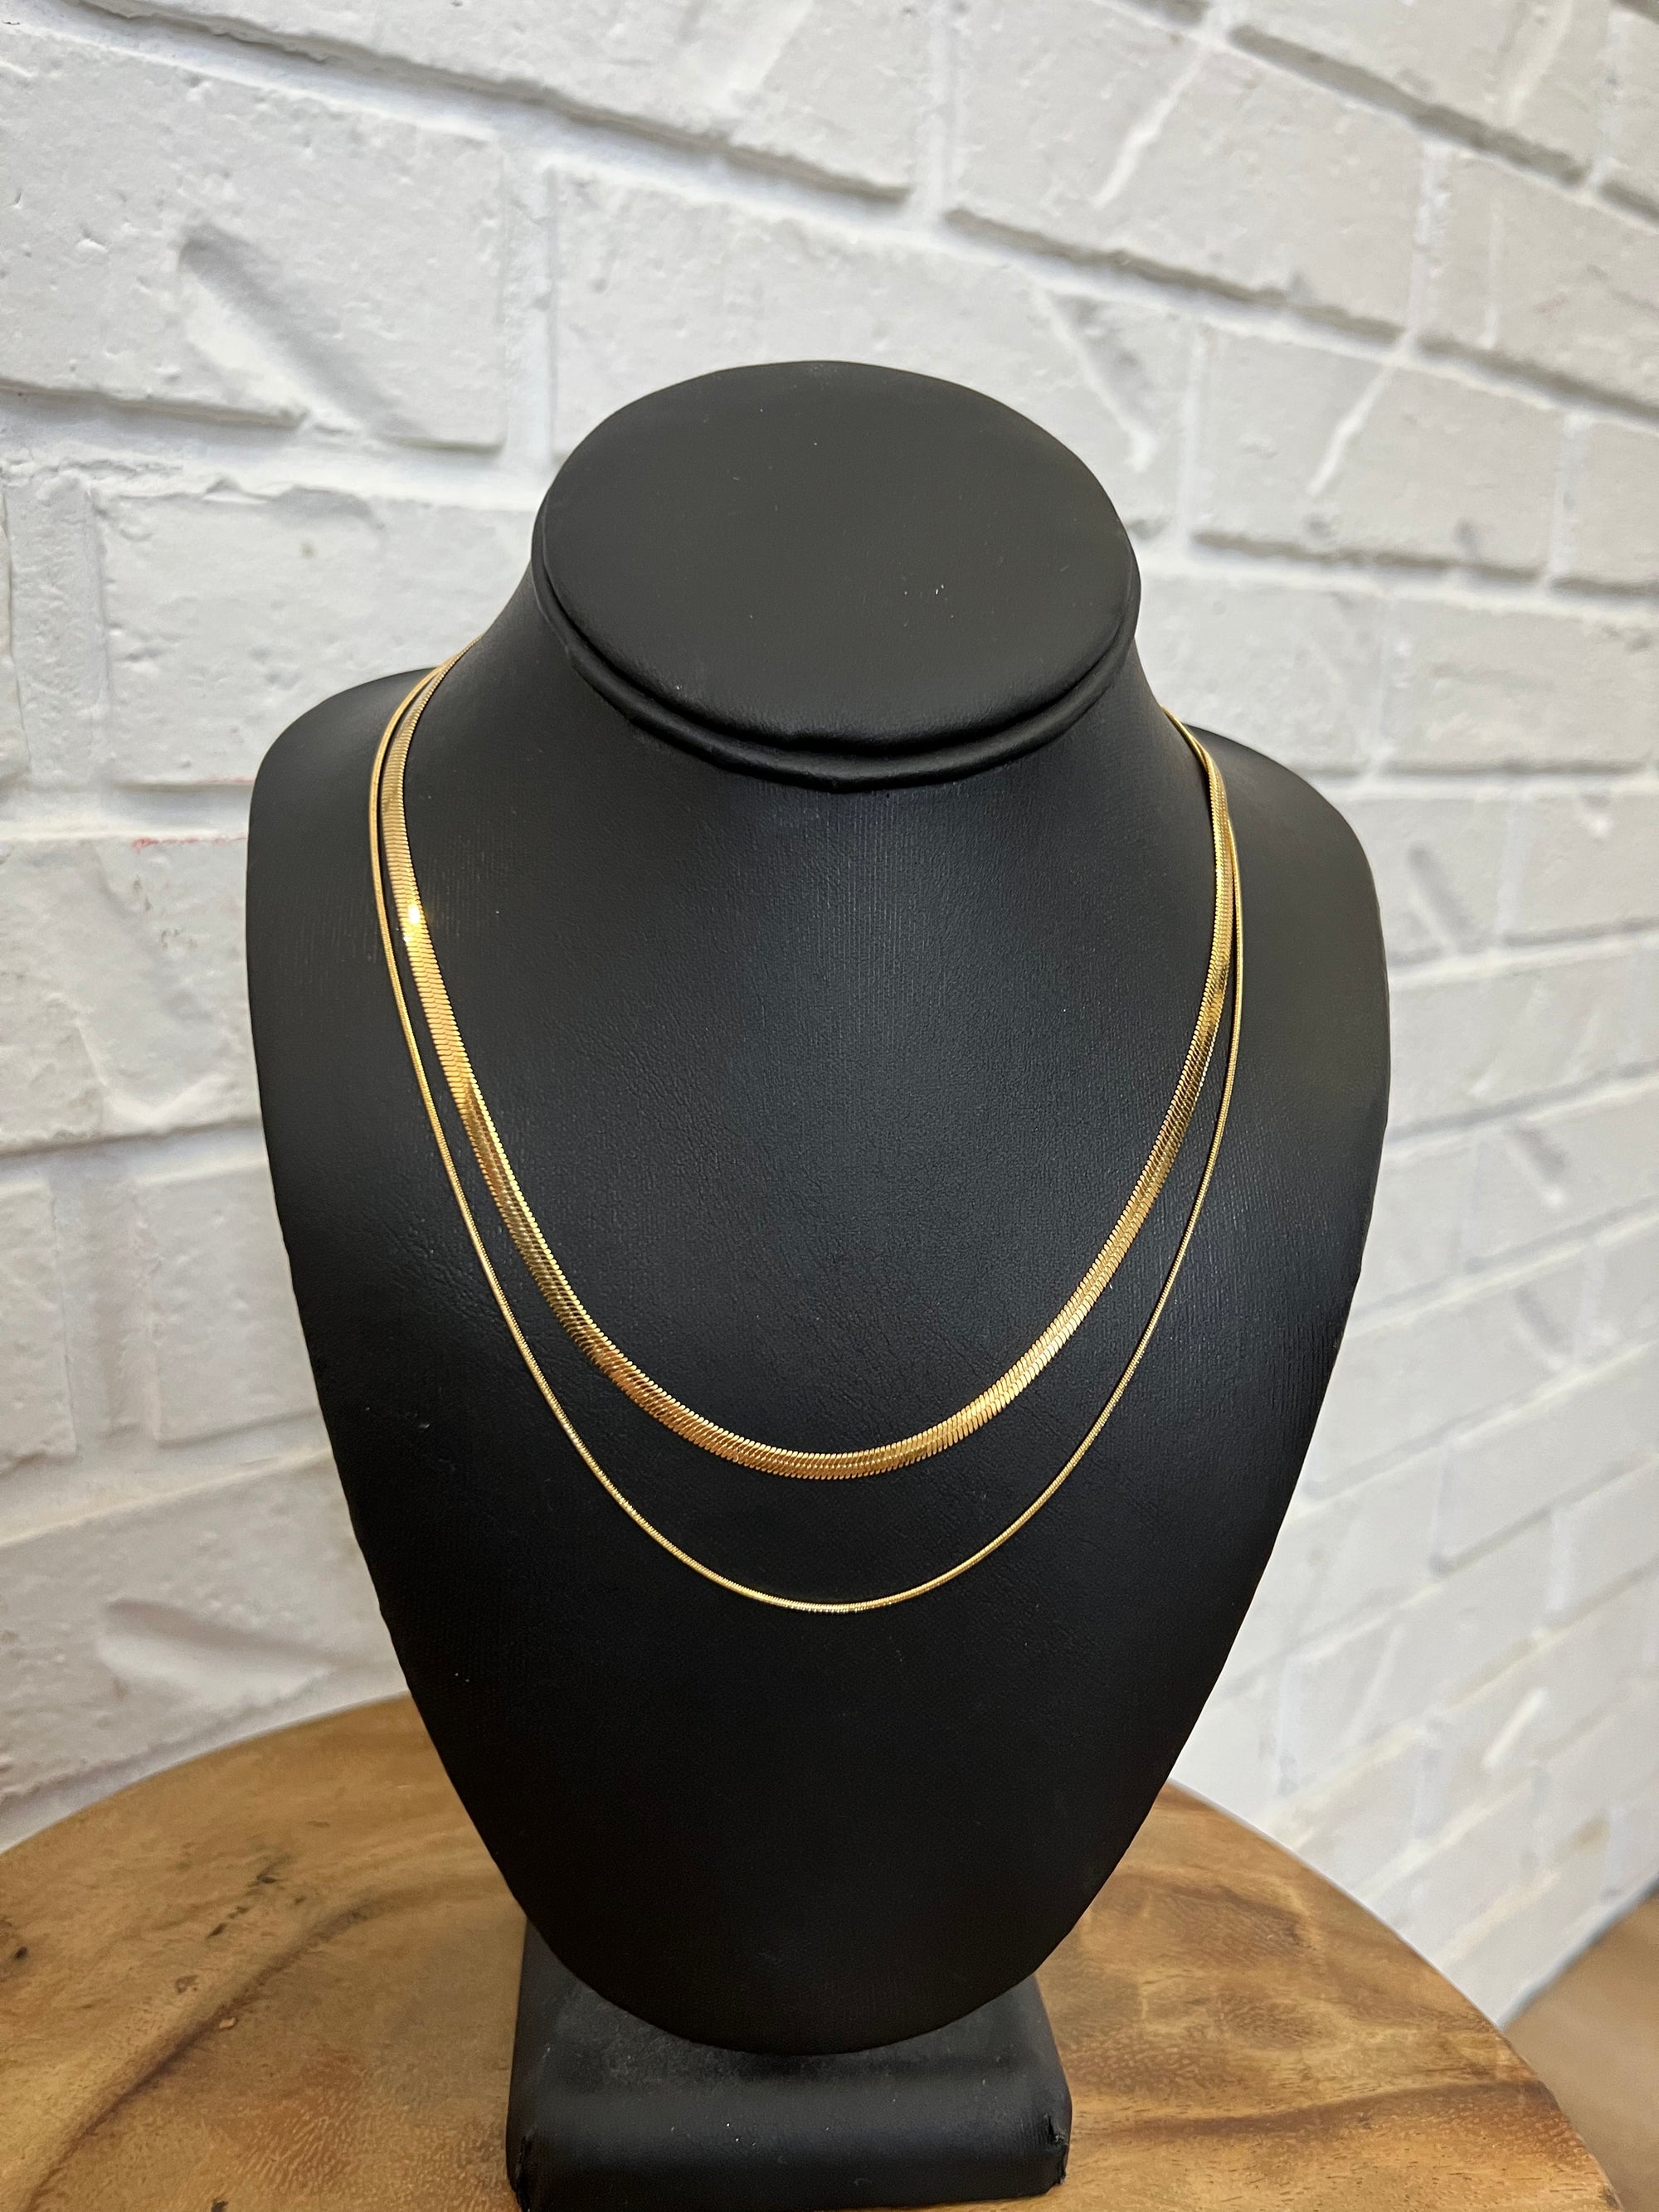 18K Madelyn Stacked Herringbone Necklace